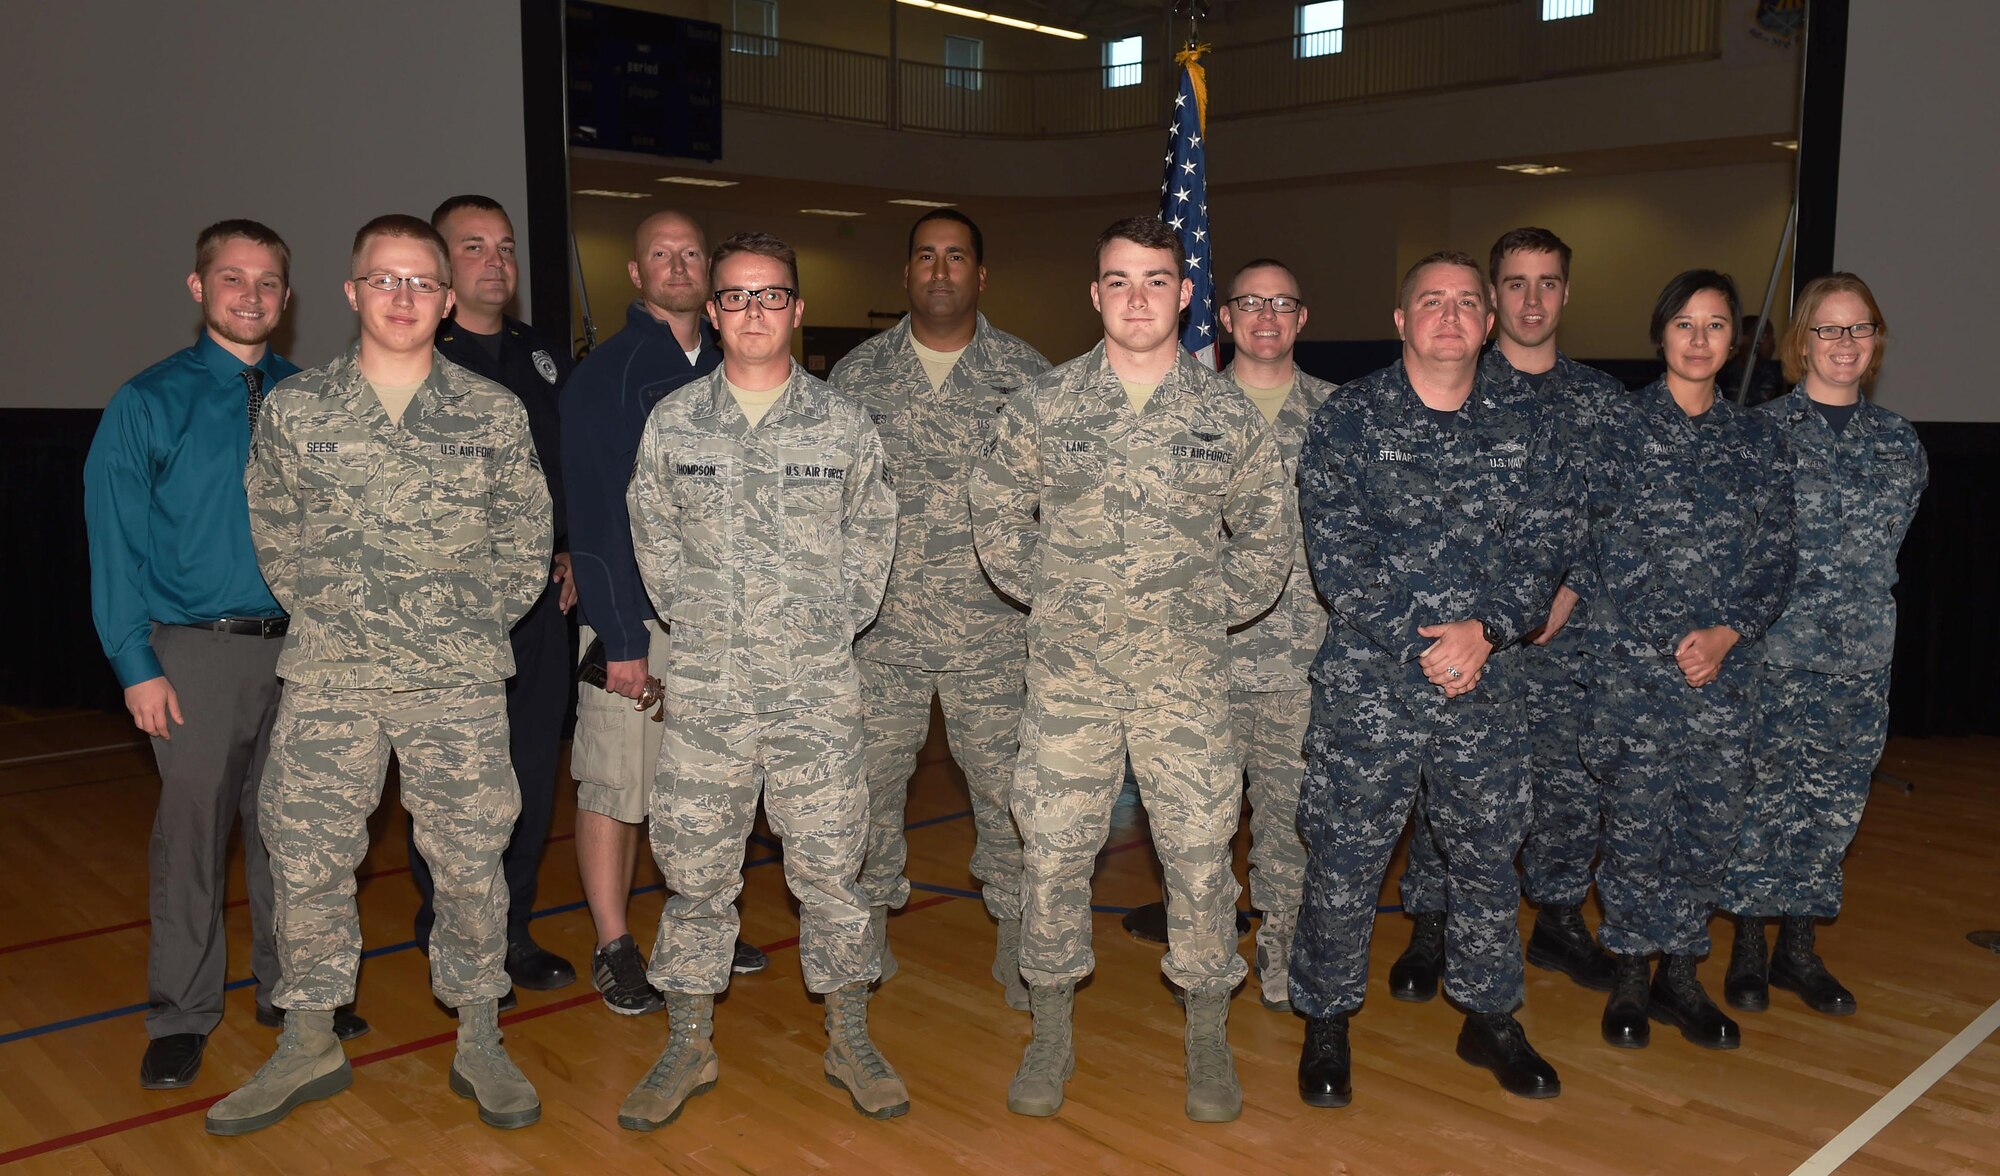 Team Buckley quarterly award winners stand together after a ceremony Oct. 29, 2015, at the fitness center on Buckley Air Force Base, Colo. Each nominee had to submit a package and go in front of a board to compete for the winning title. (U.S. Air Force photo by Airman 1st Class Samantha Meadors/Released)